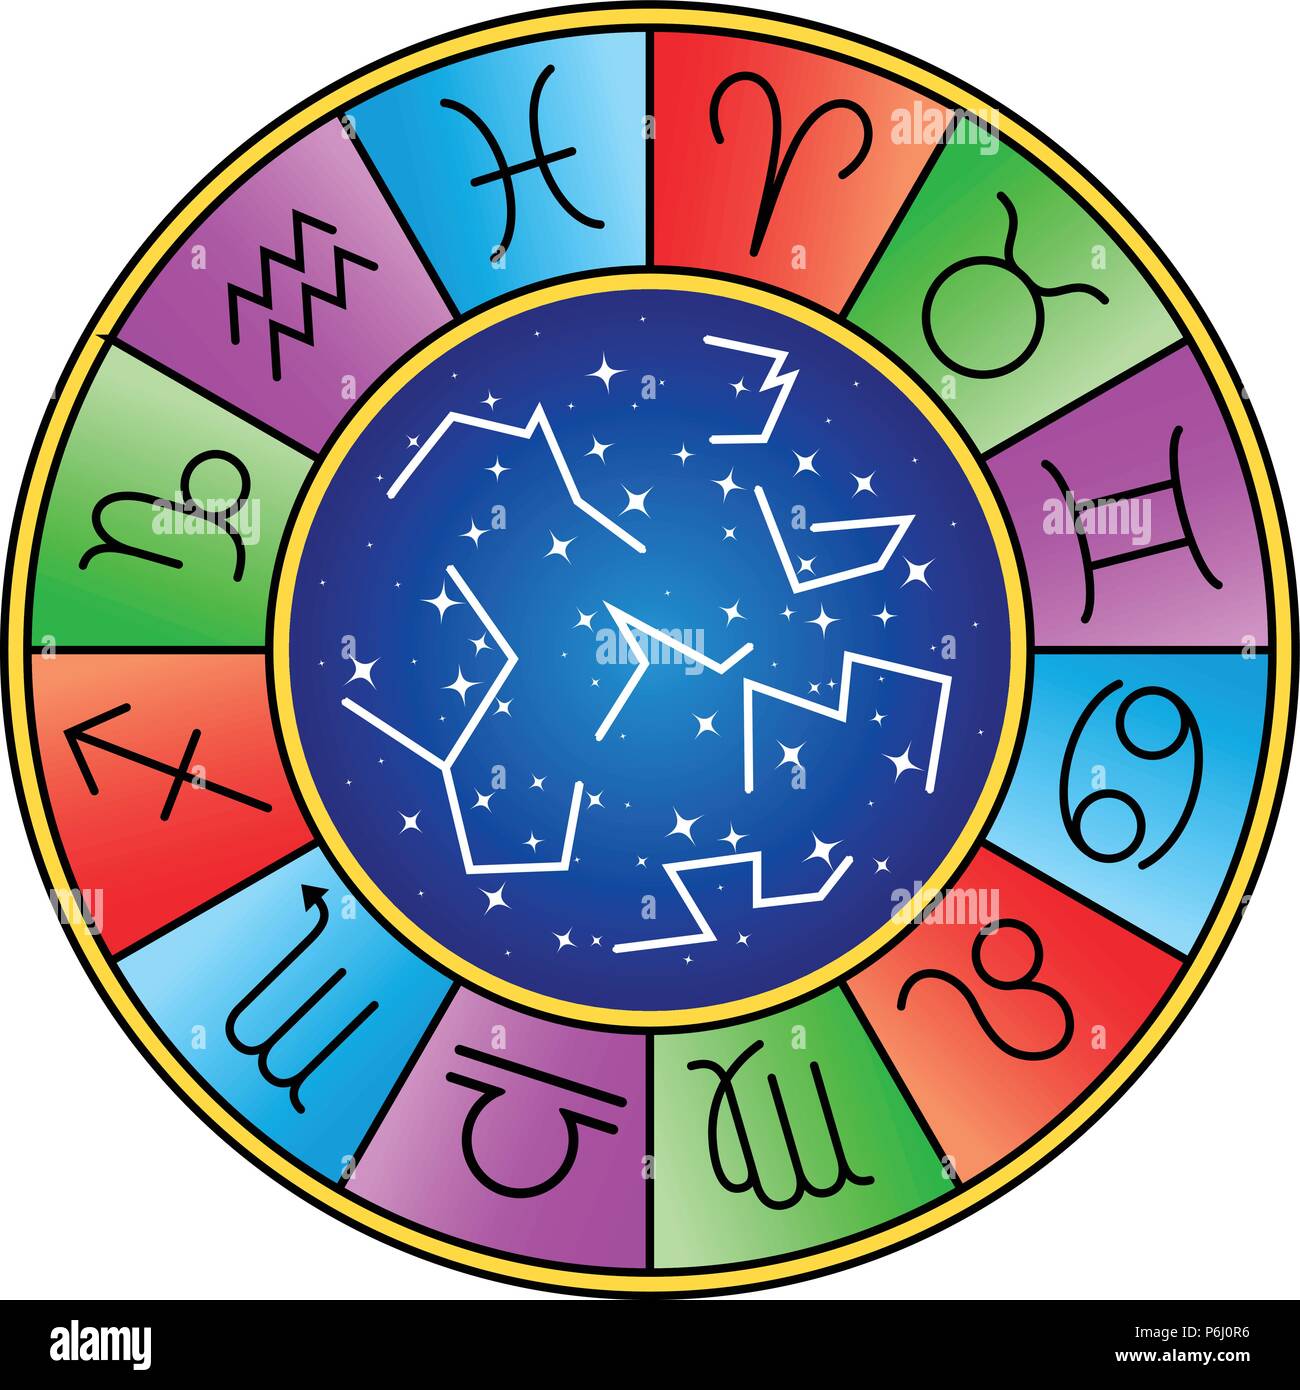 wheel of horoscope signs or symbols isolated Stock Vector Image & Art ...